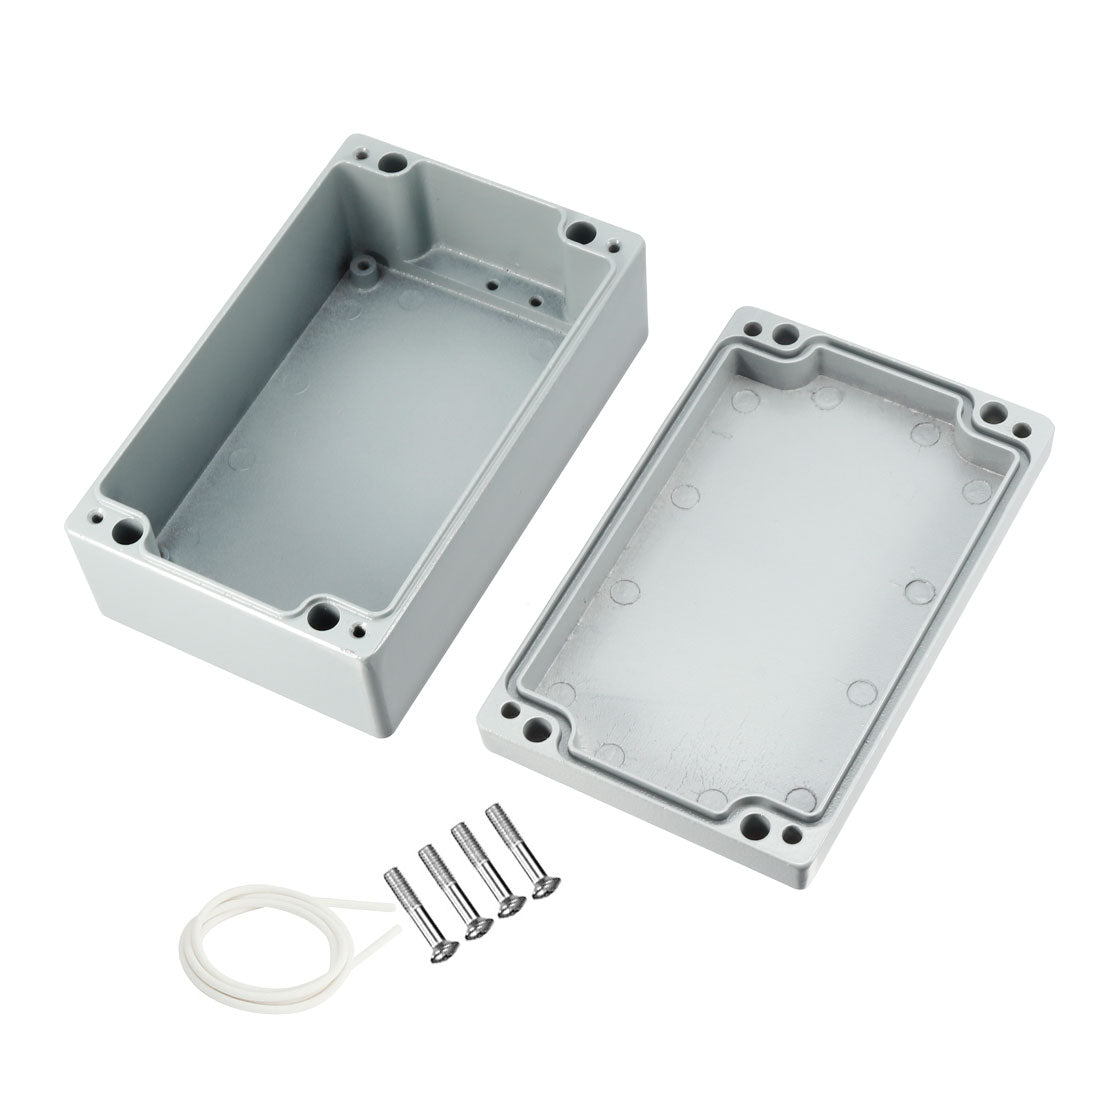 uxcell Uxcell 6.3"x3.9"x2.3"(160mmx100mmx60mm) Aluminum Junction Box Universal Electric Project Enclosure